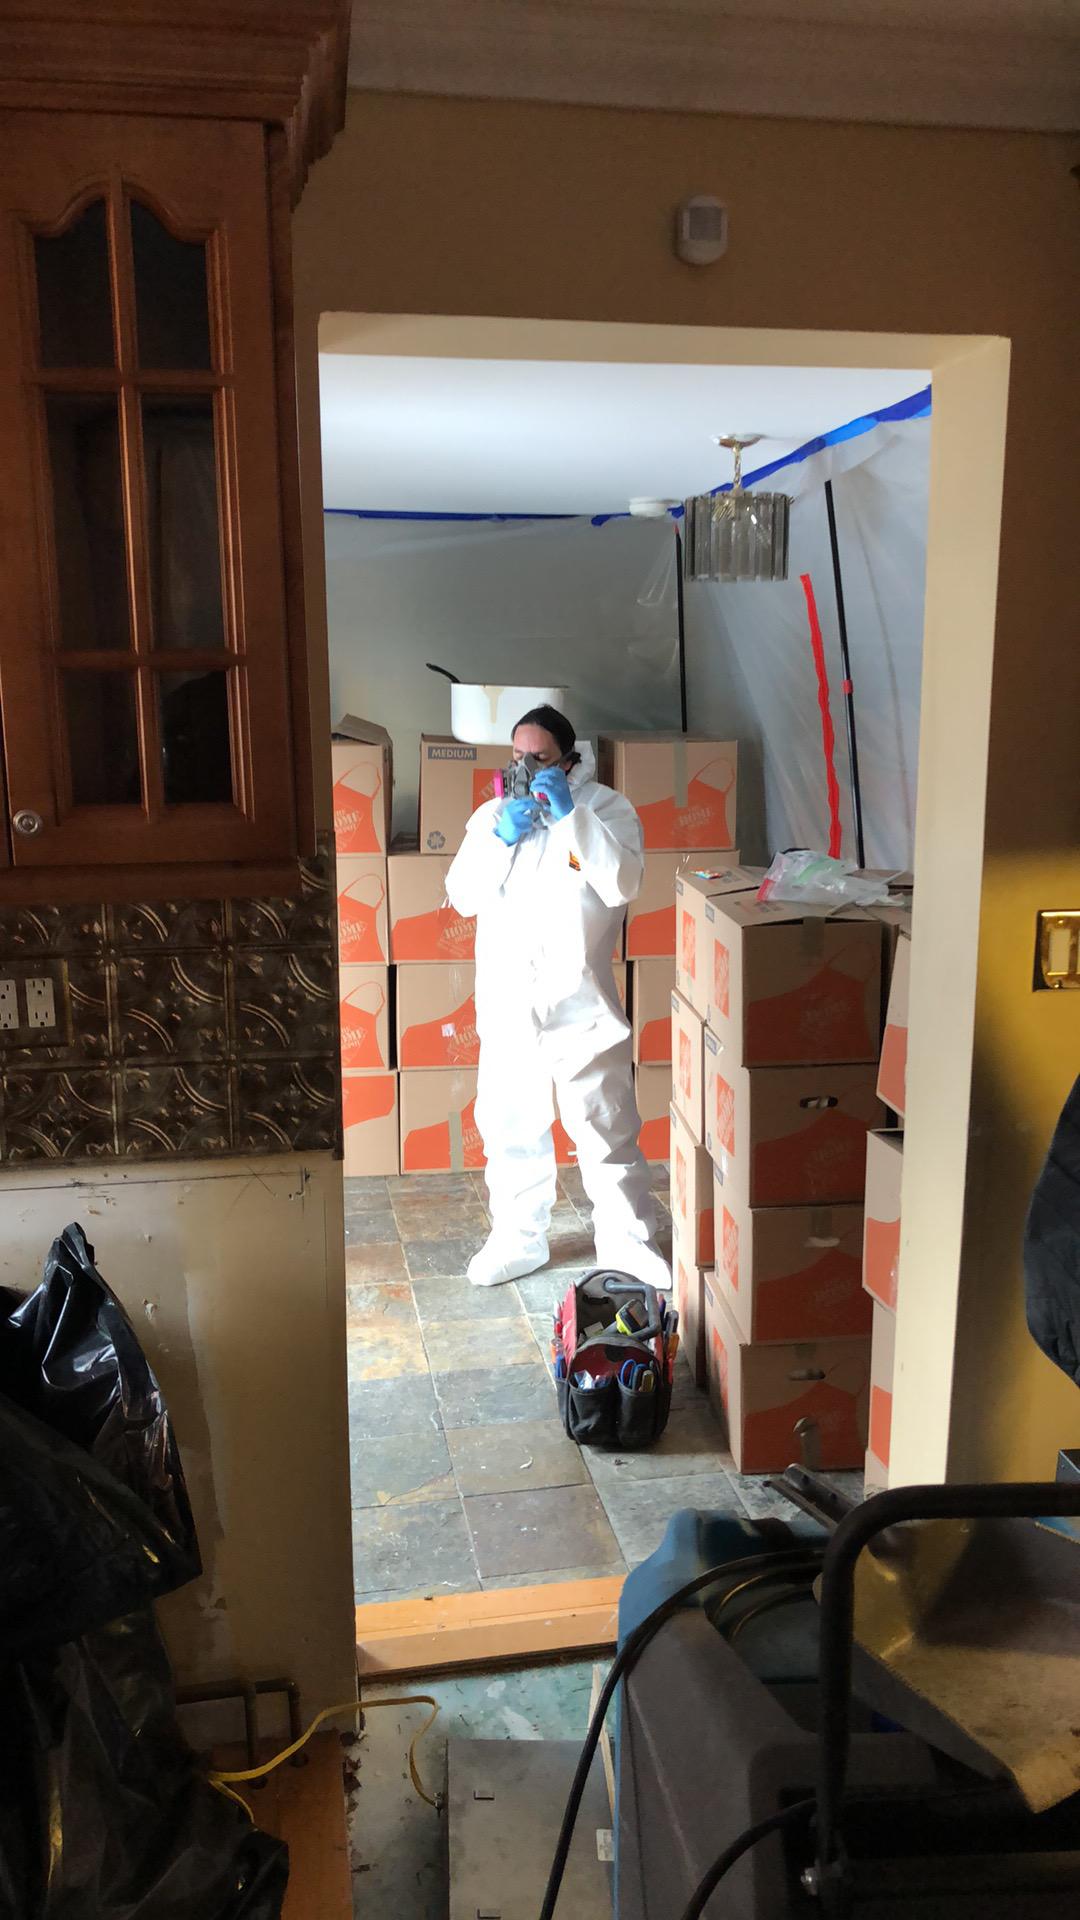 Suiting up for mold removal